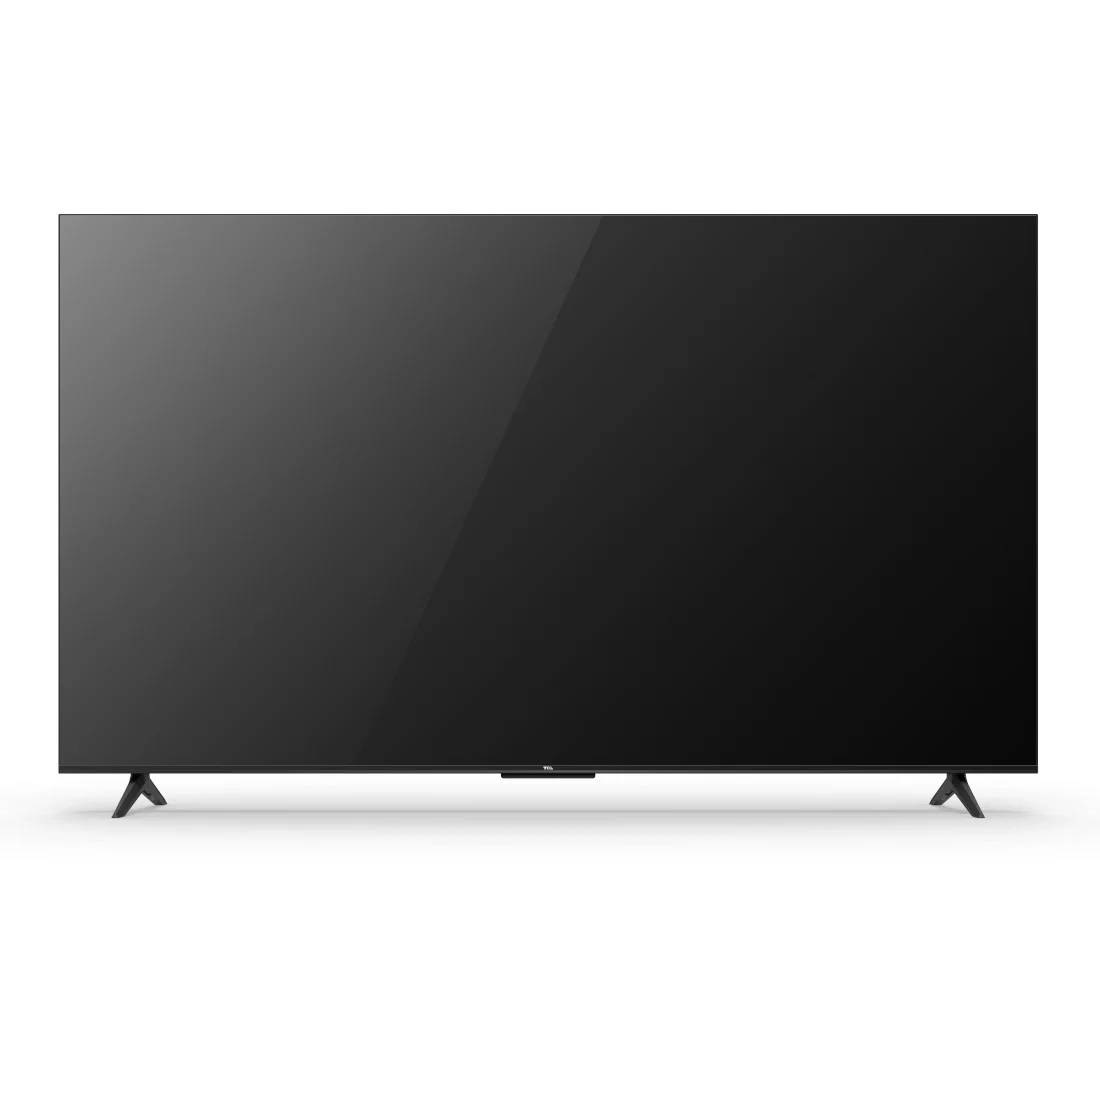 TCL TV DLED GOOGLE TV 65 » UHD- EDGELESS DESIGN / TCL_65P635 - FEX